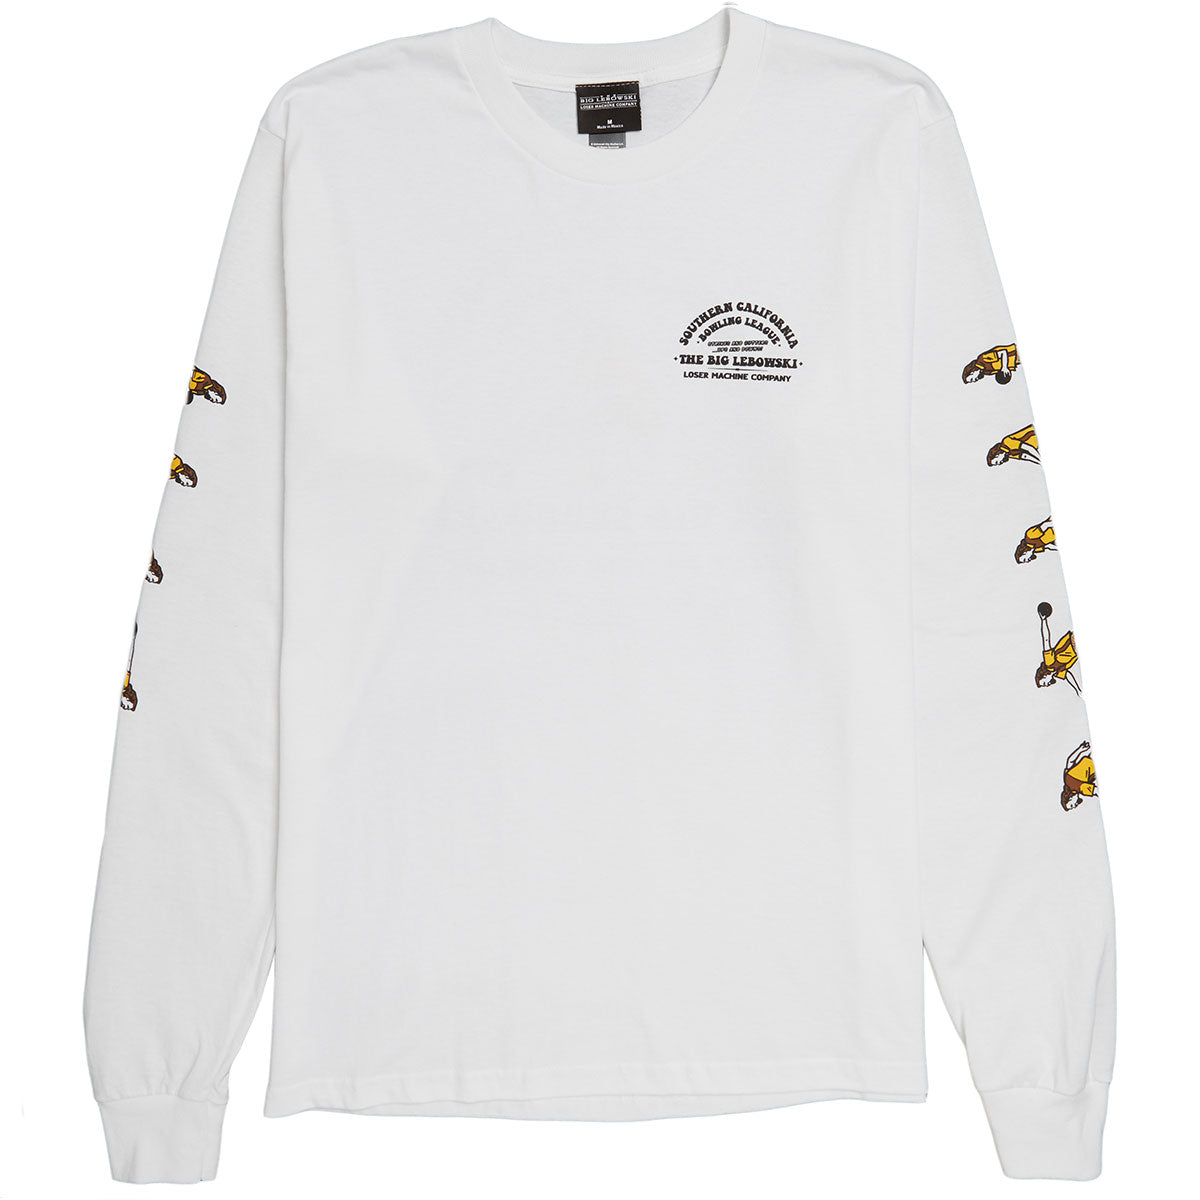 Loser Machine Over The Line Long Sleeve T-Shirt - White image 2